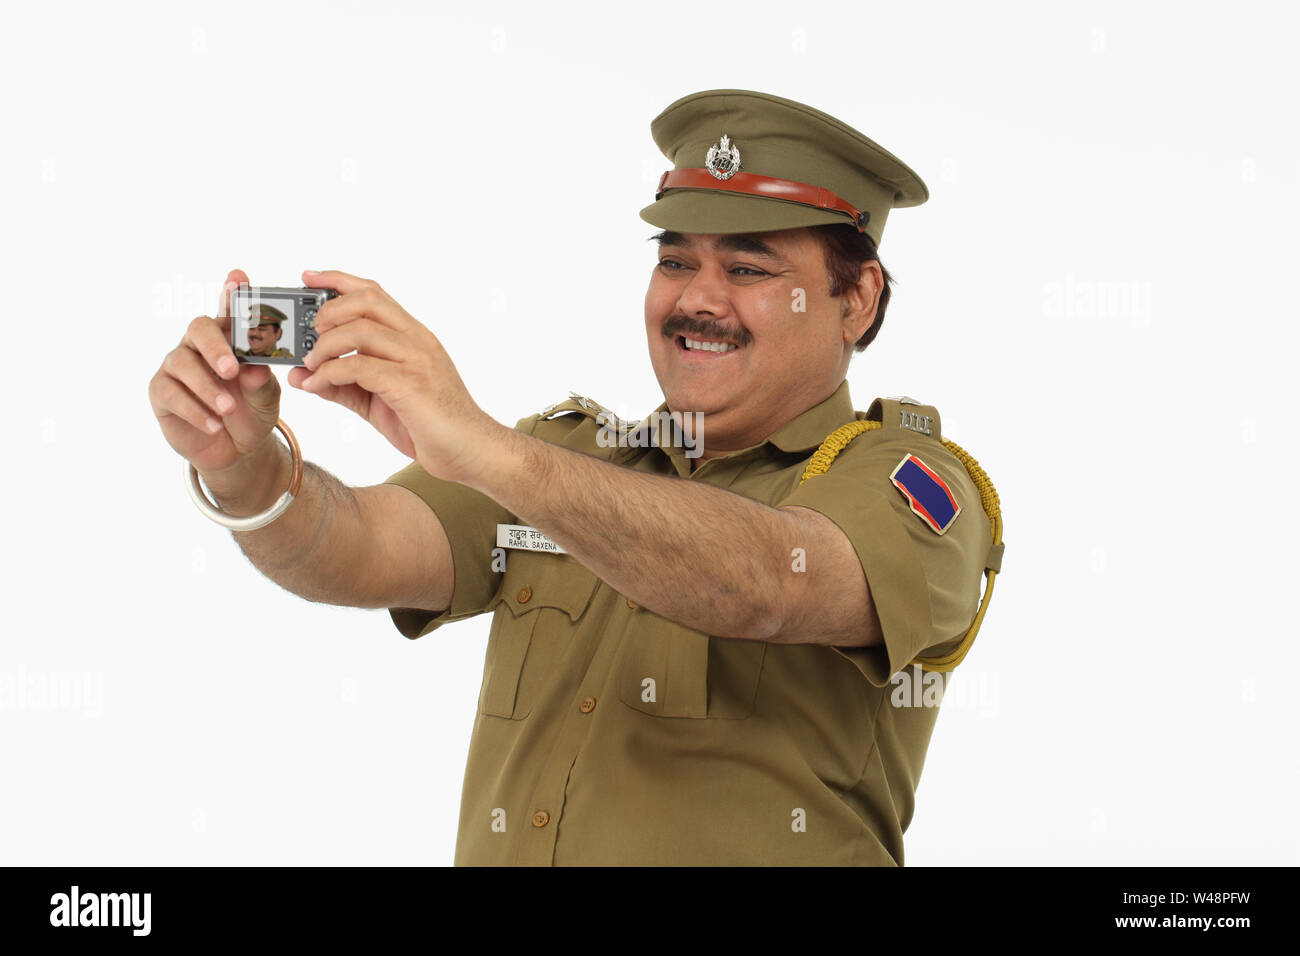 Indian Police High Resolution Stock Photography and Images - Alamy